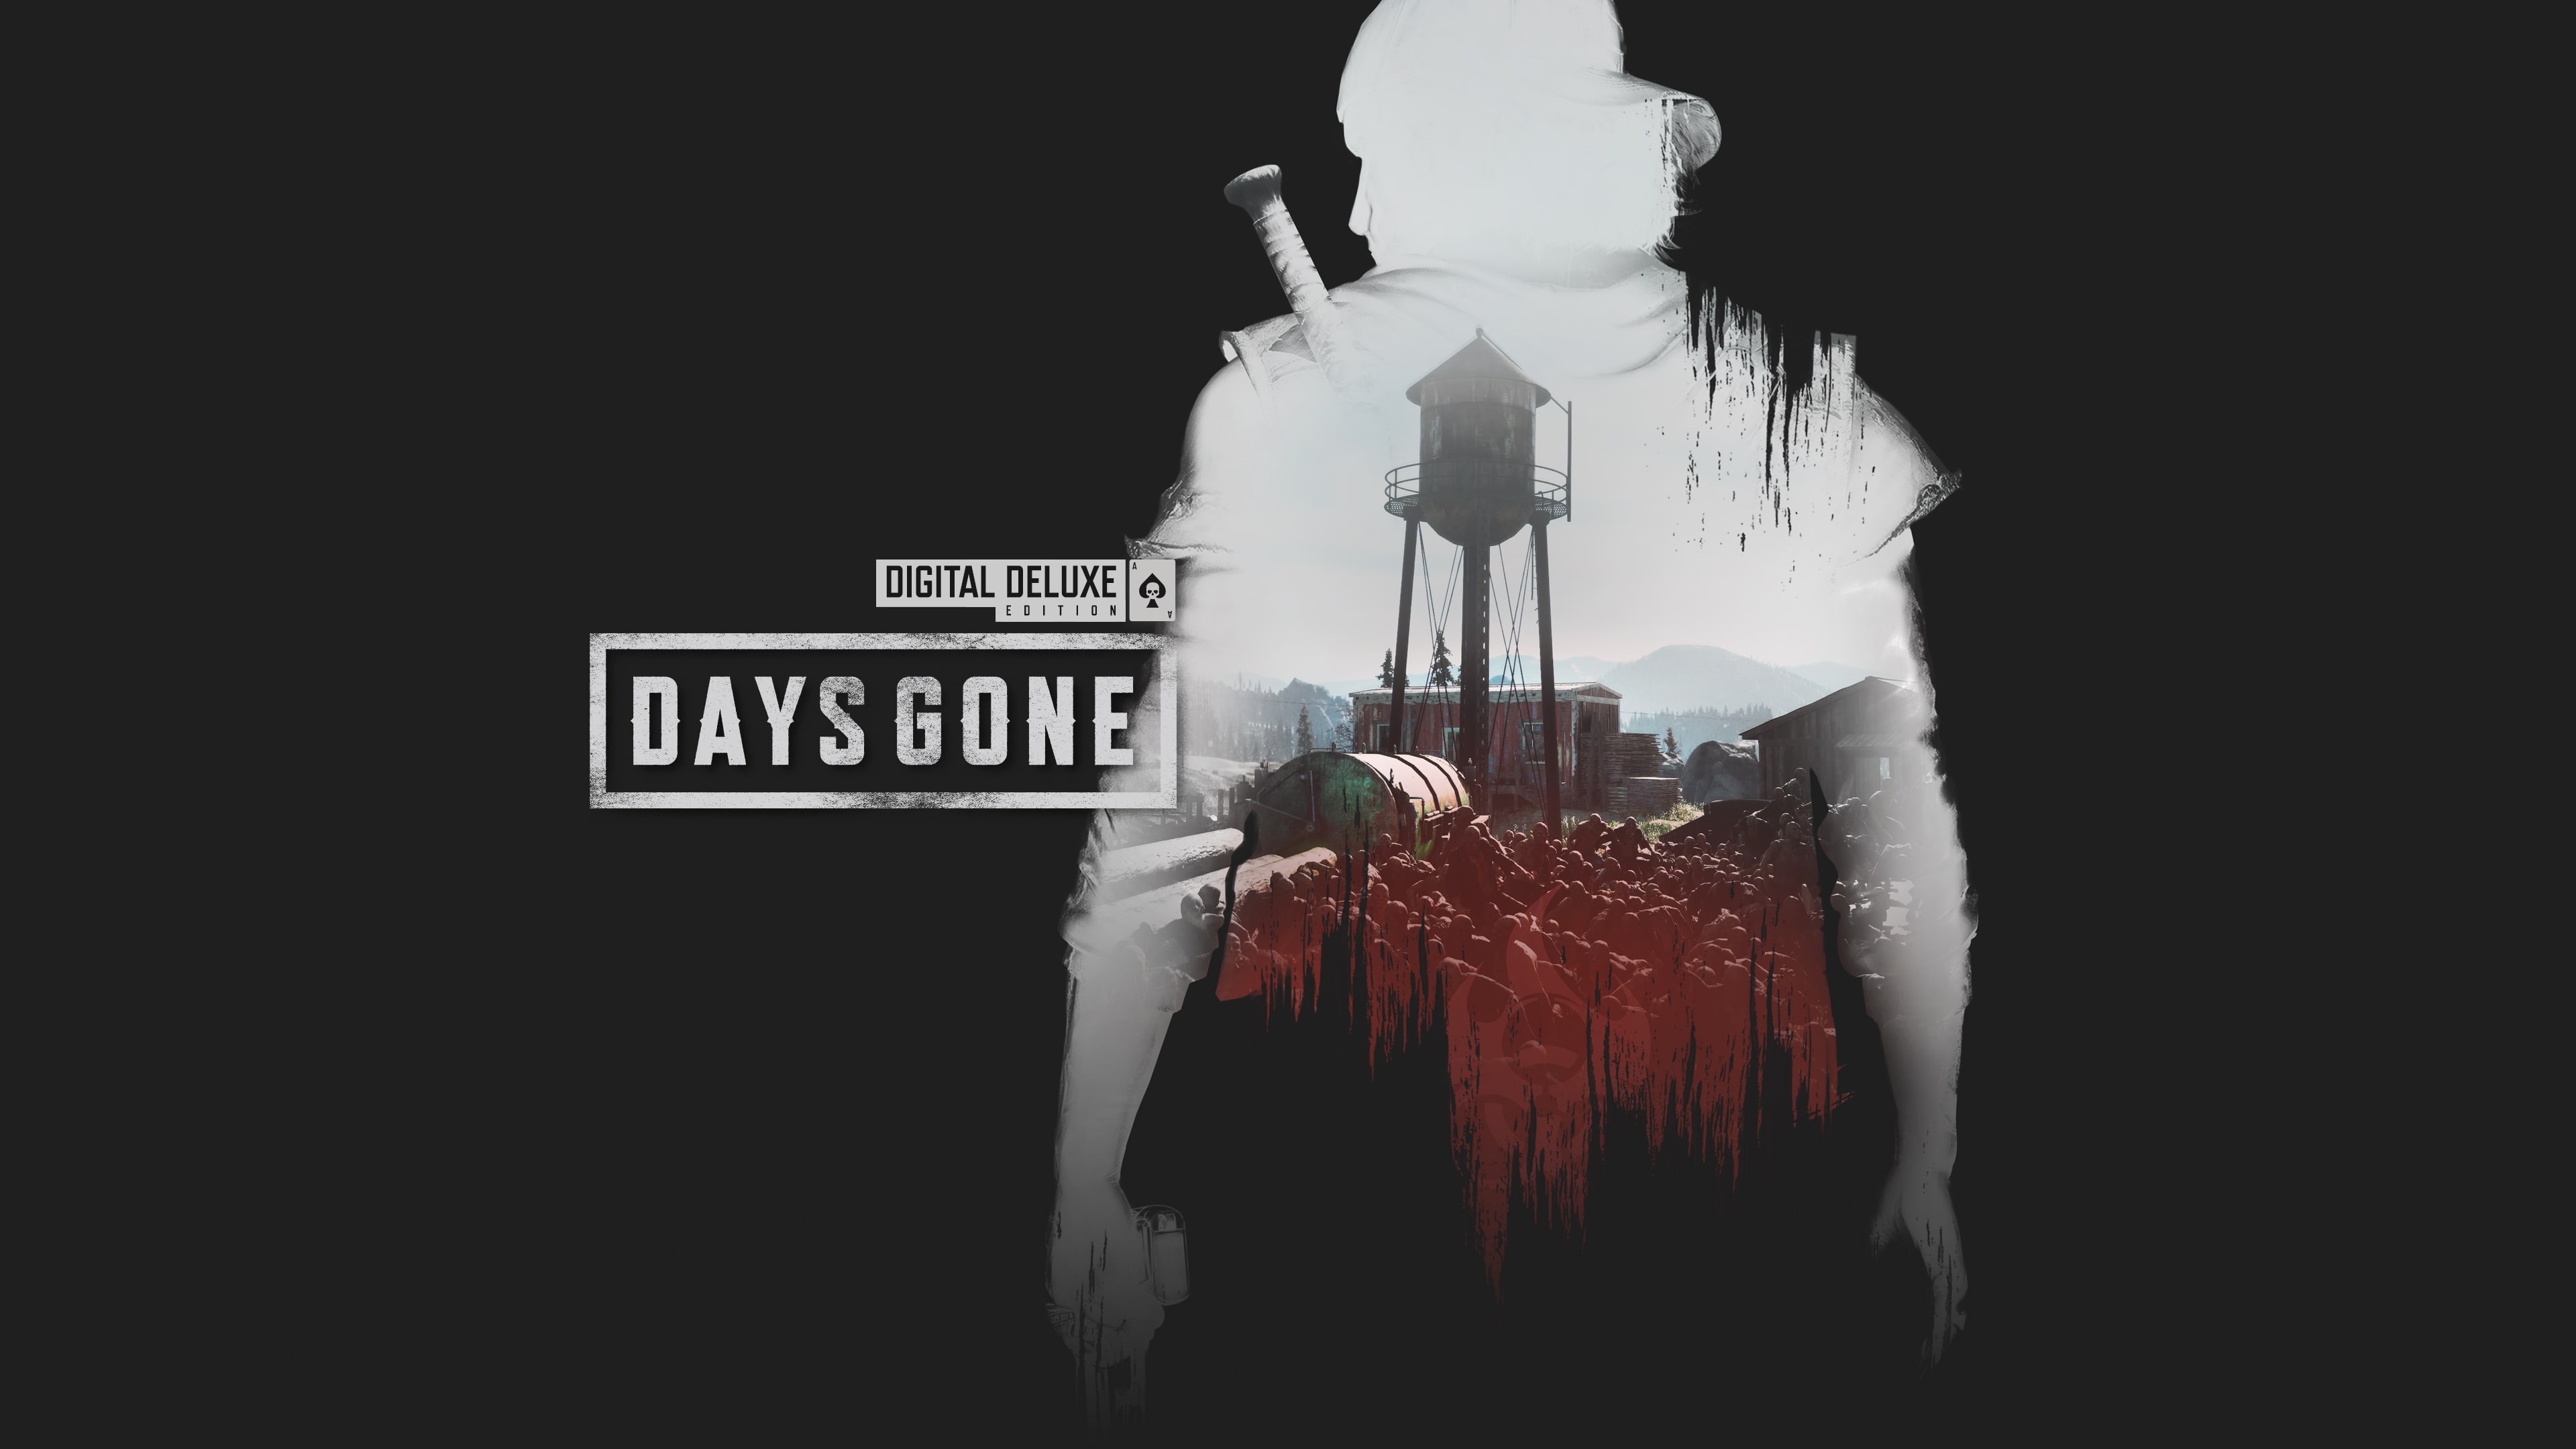 Days Gone Digital Deluxe Edition (Simplified Chinese, English, Korean)